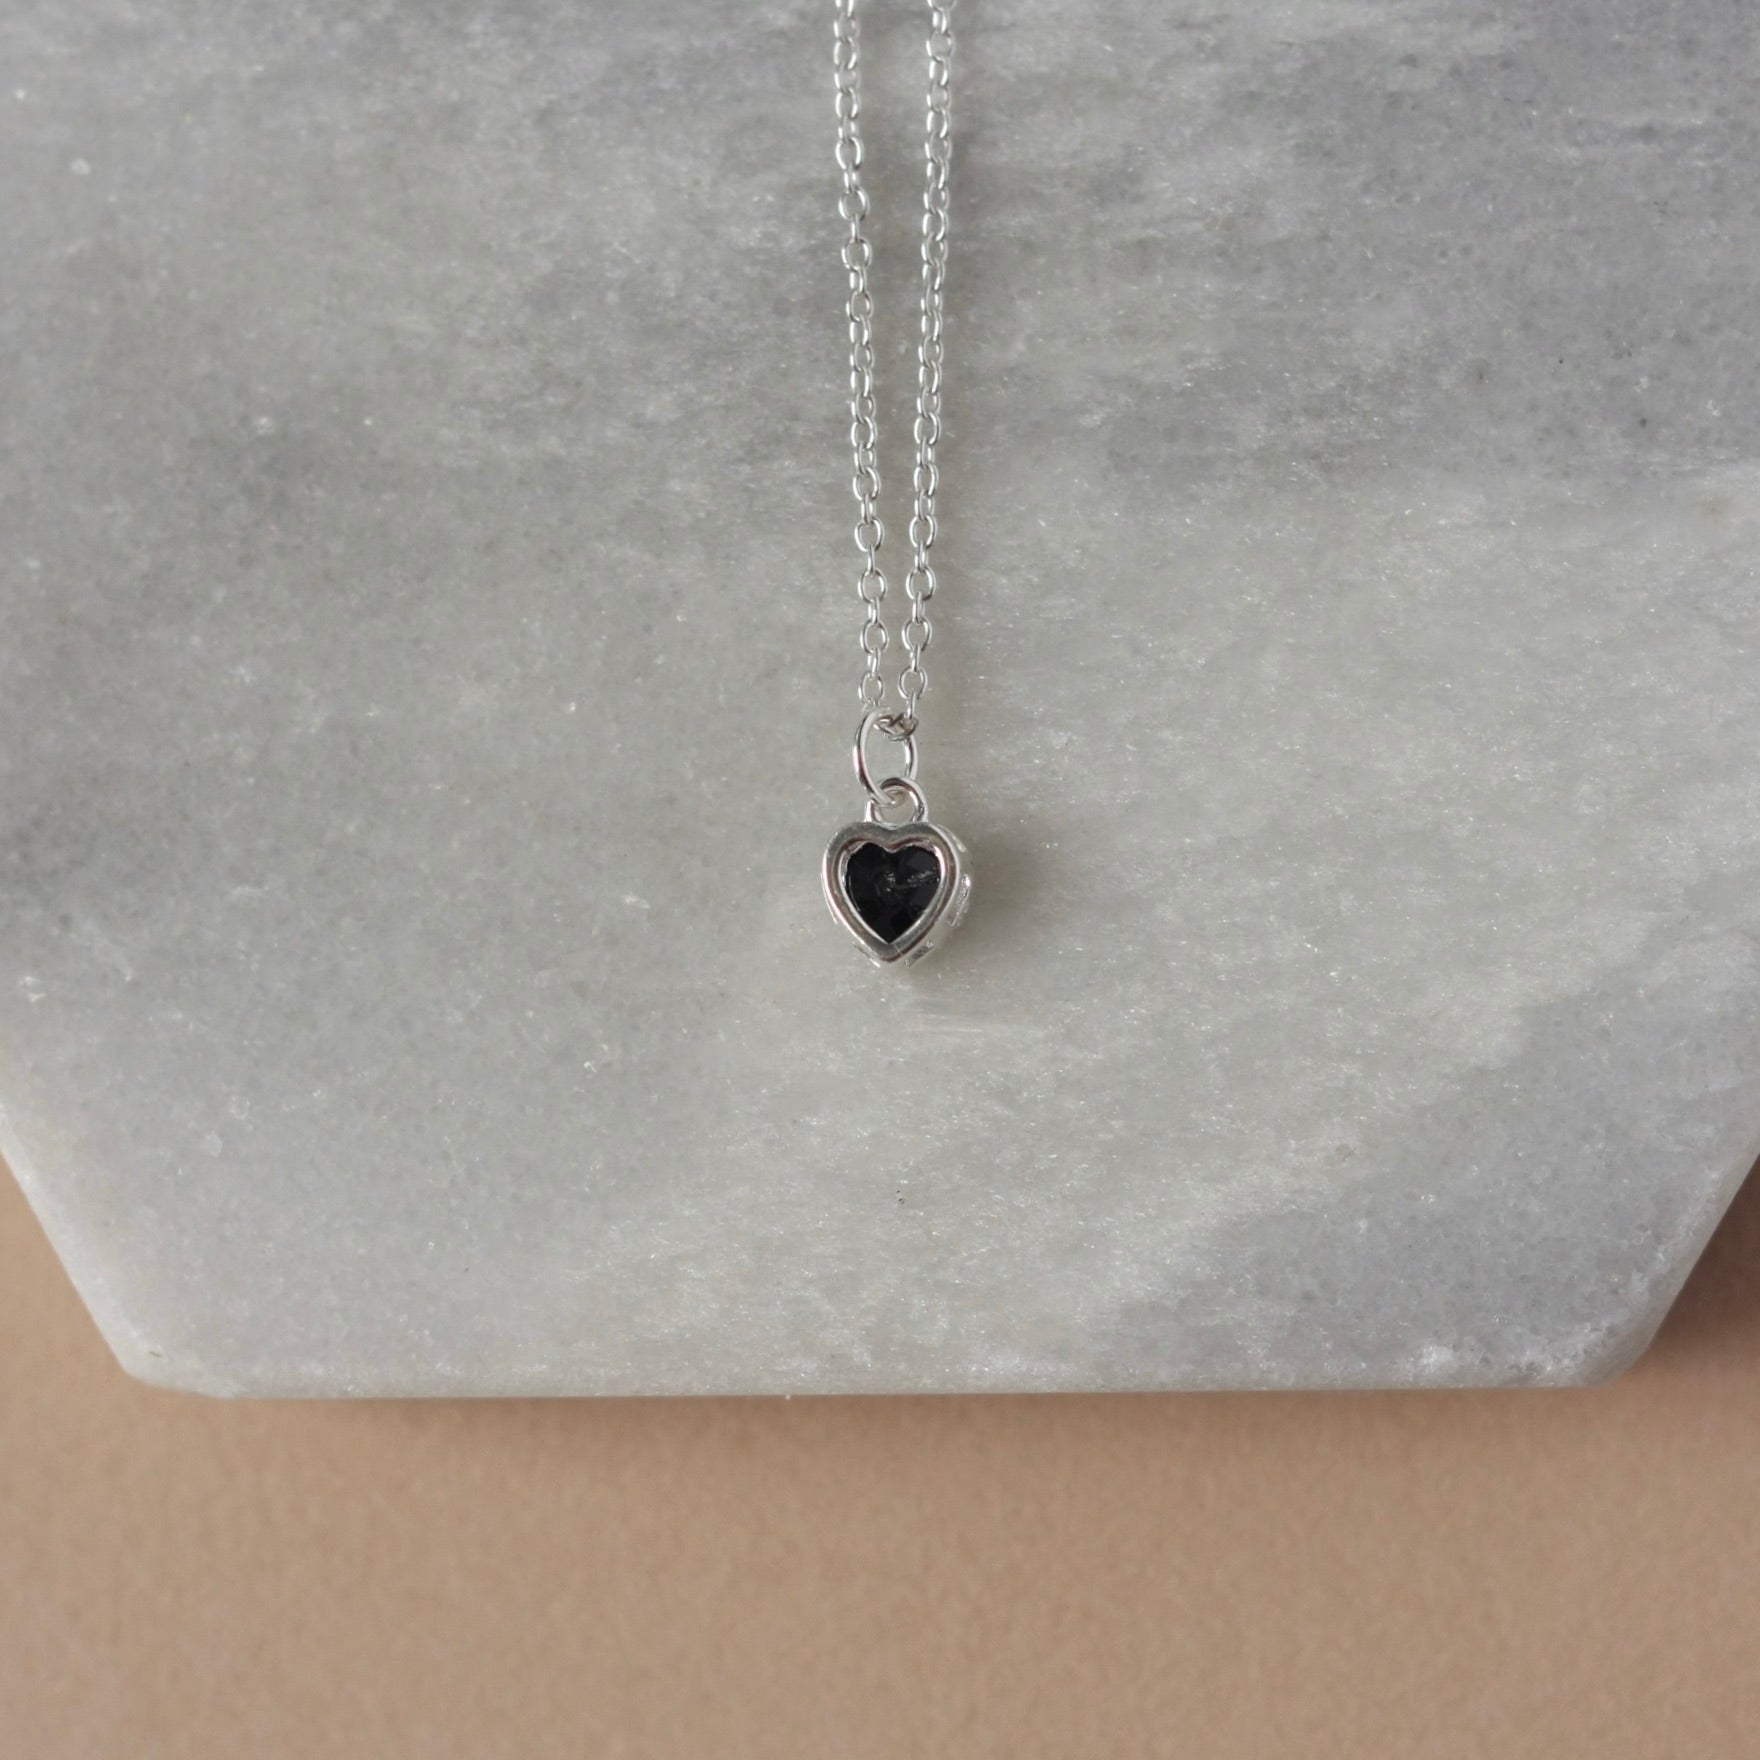 Small Black CZ Heart Charm Necklace